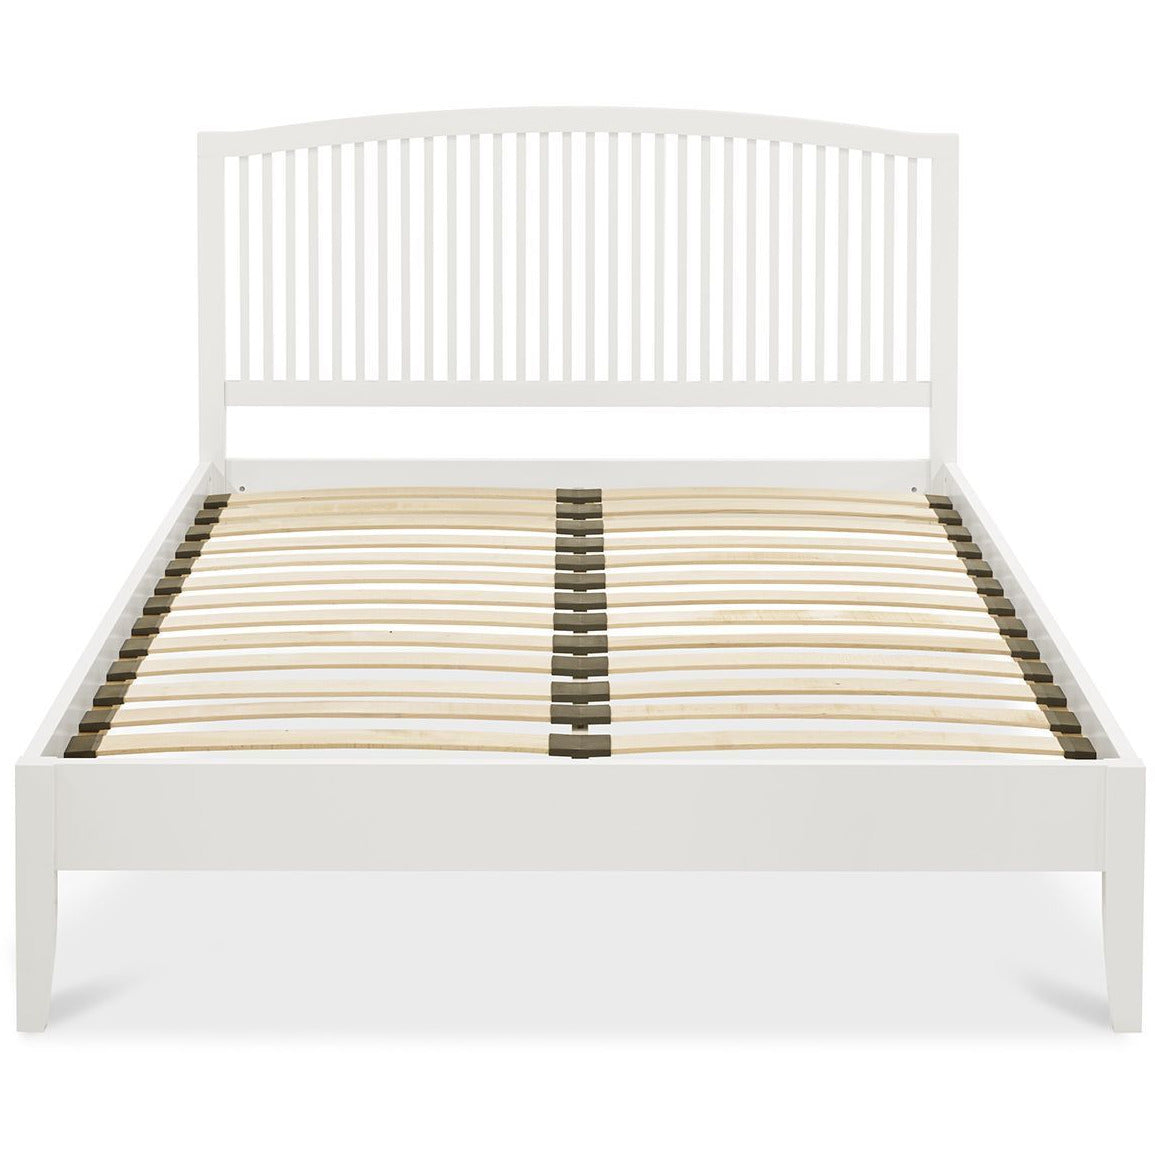 Ashby White 4ft Small Double Bed Frame from Upstairs Downstairs Furniture in Lisburn, Monaghan and Enniskillen | bedframe